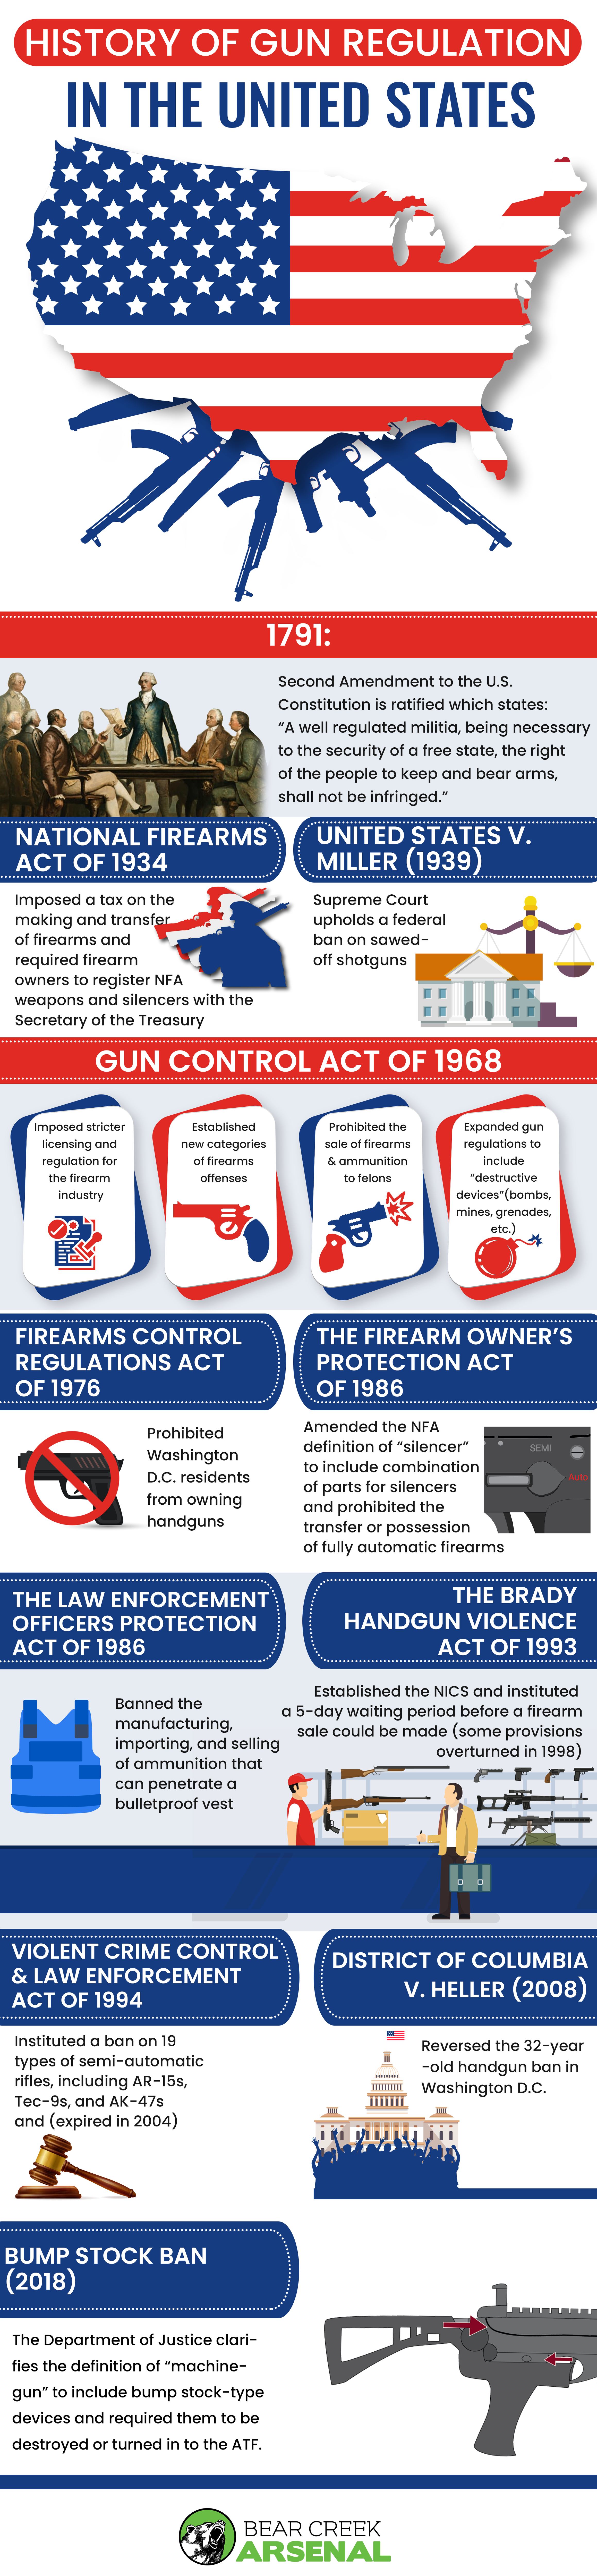 A Brief History of Guns in the U.S.